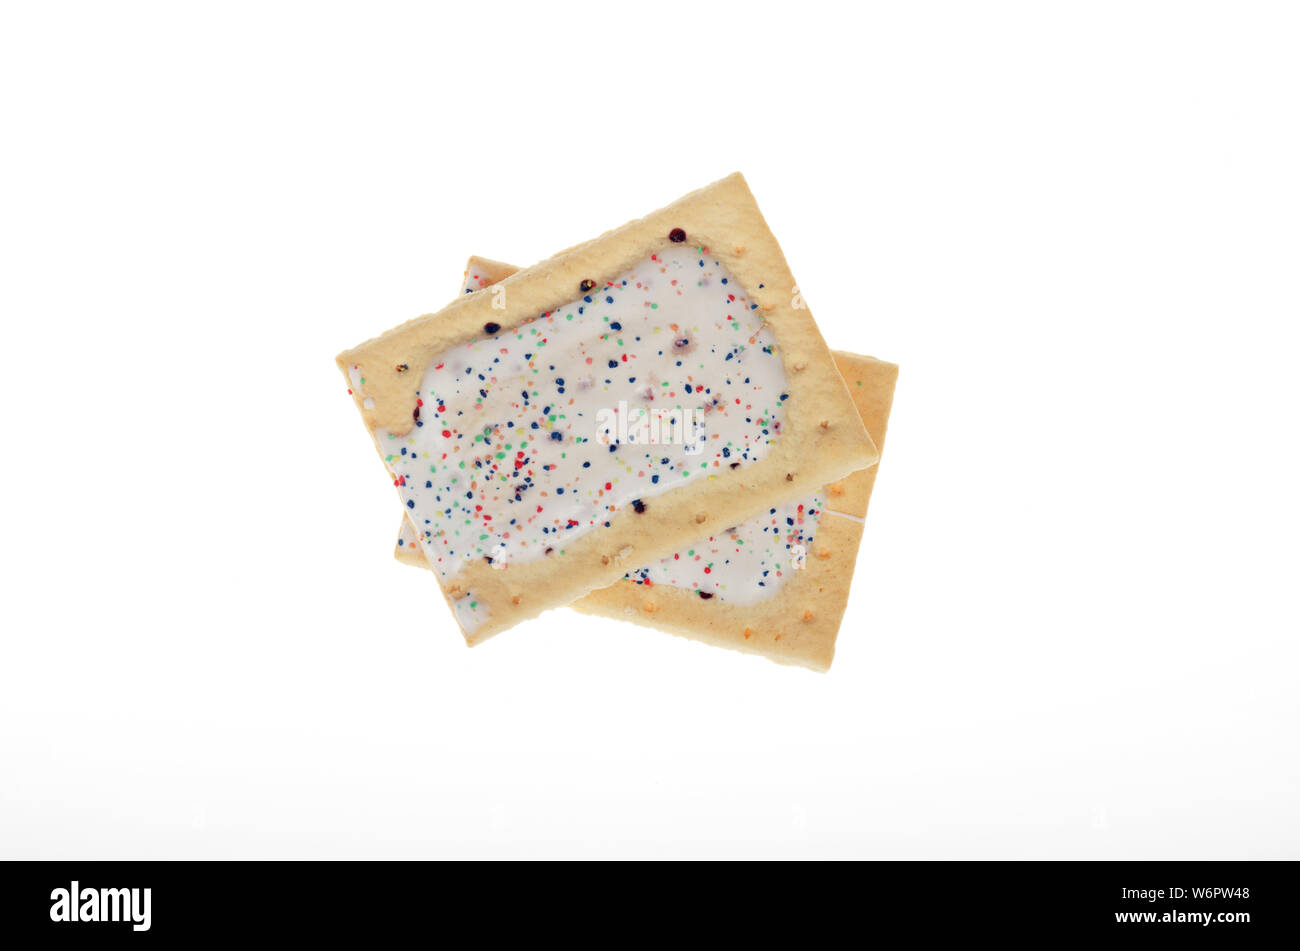 Kellogg’s frosted blueberry Pop-Tarts toaster pastries Stock Photo